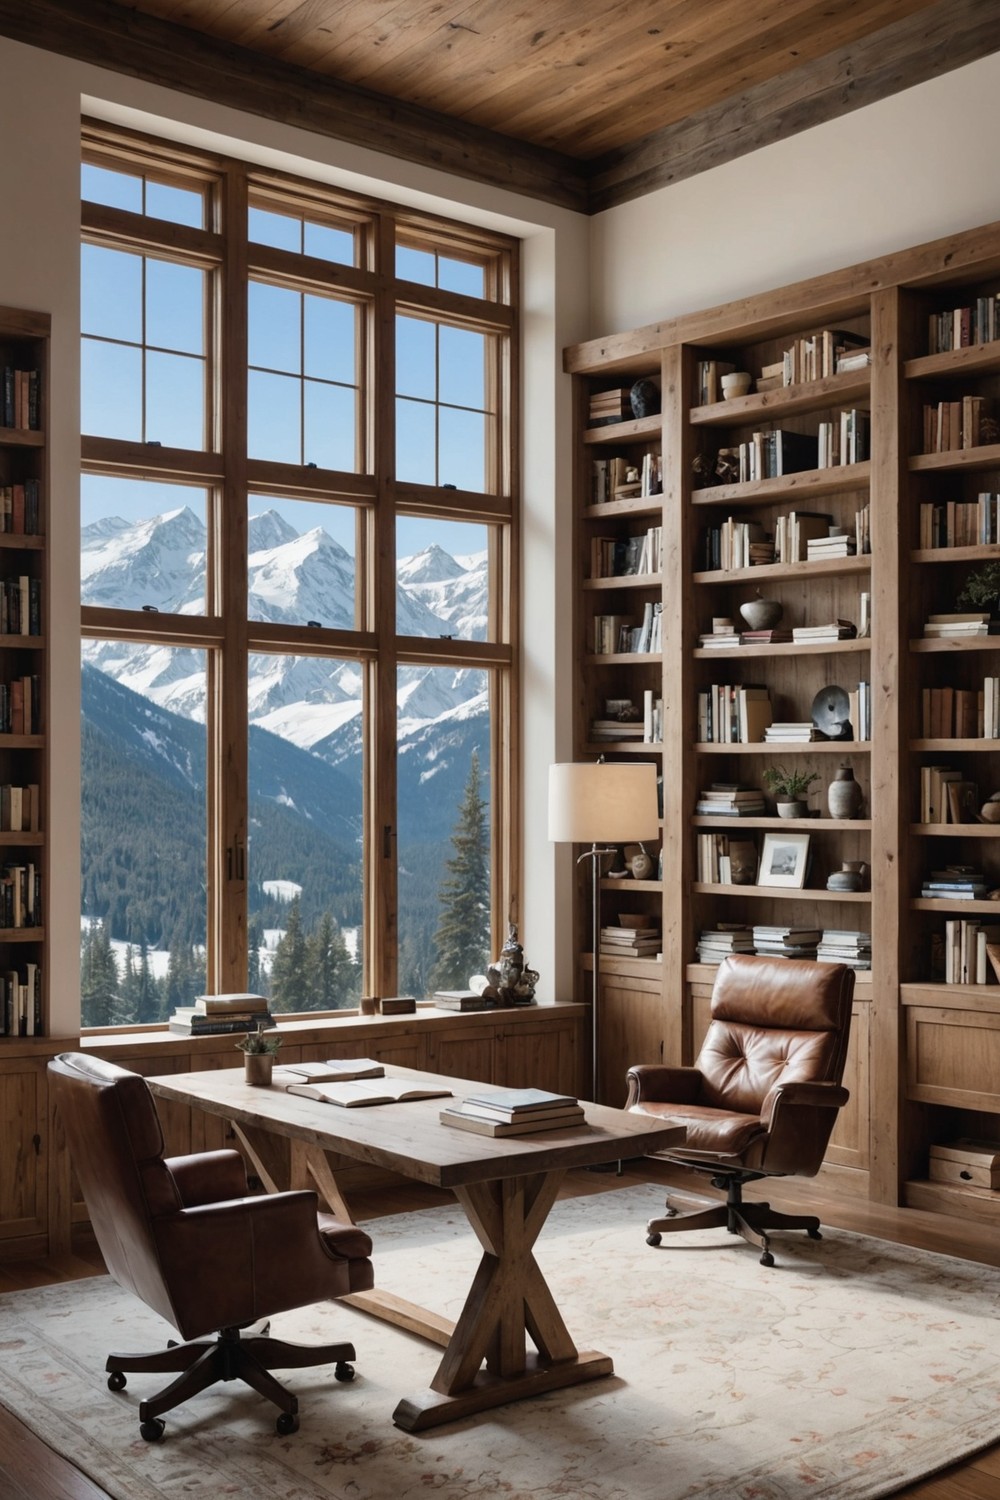 Cozy Home Offices with Built-in Desks and Bookshelves